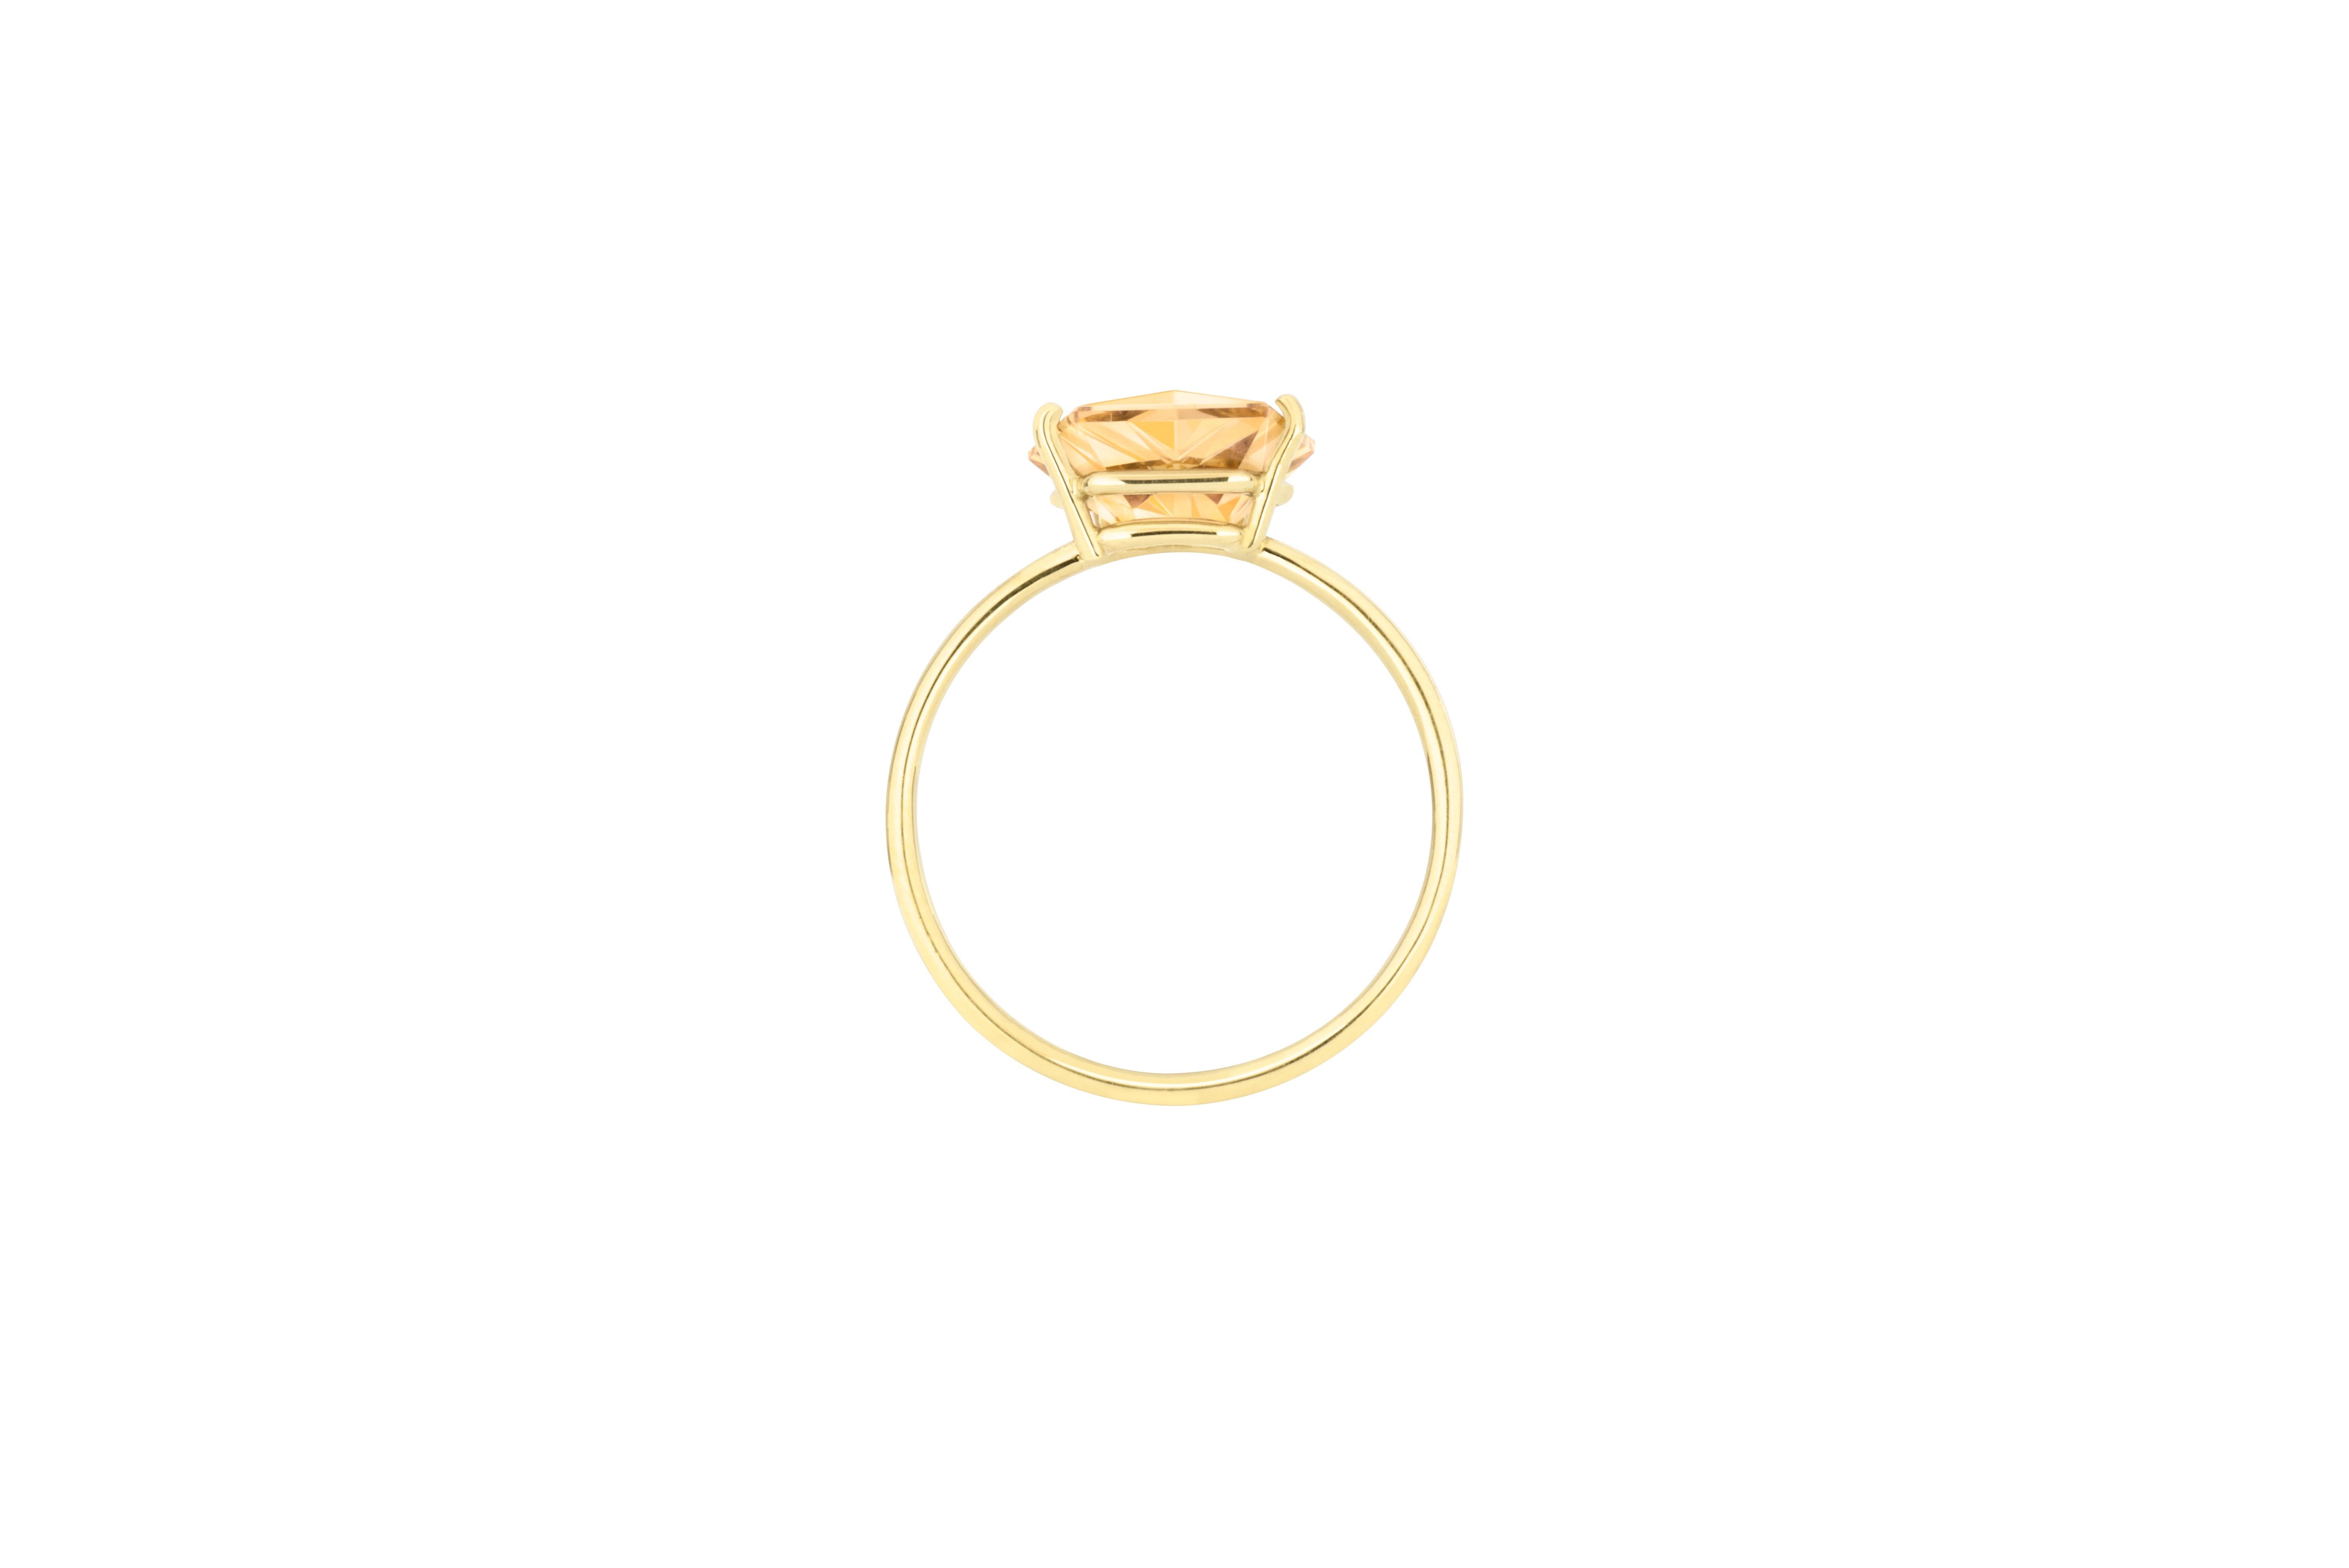 Created by Estela Guitart for MISUI, this 2 carat Citrine Klar ring explores the harmony of colour. Fine gold structures frame the gemstone and give it a soft, airy feeling, highlighting its virtue.

To enhance the natural colour of this stone in